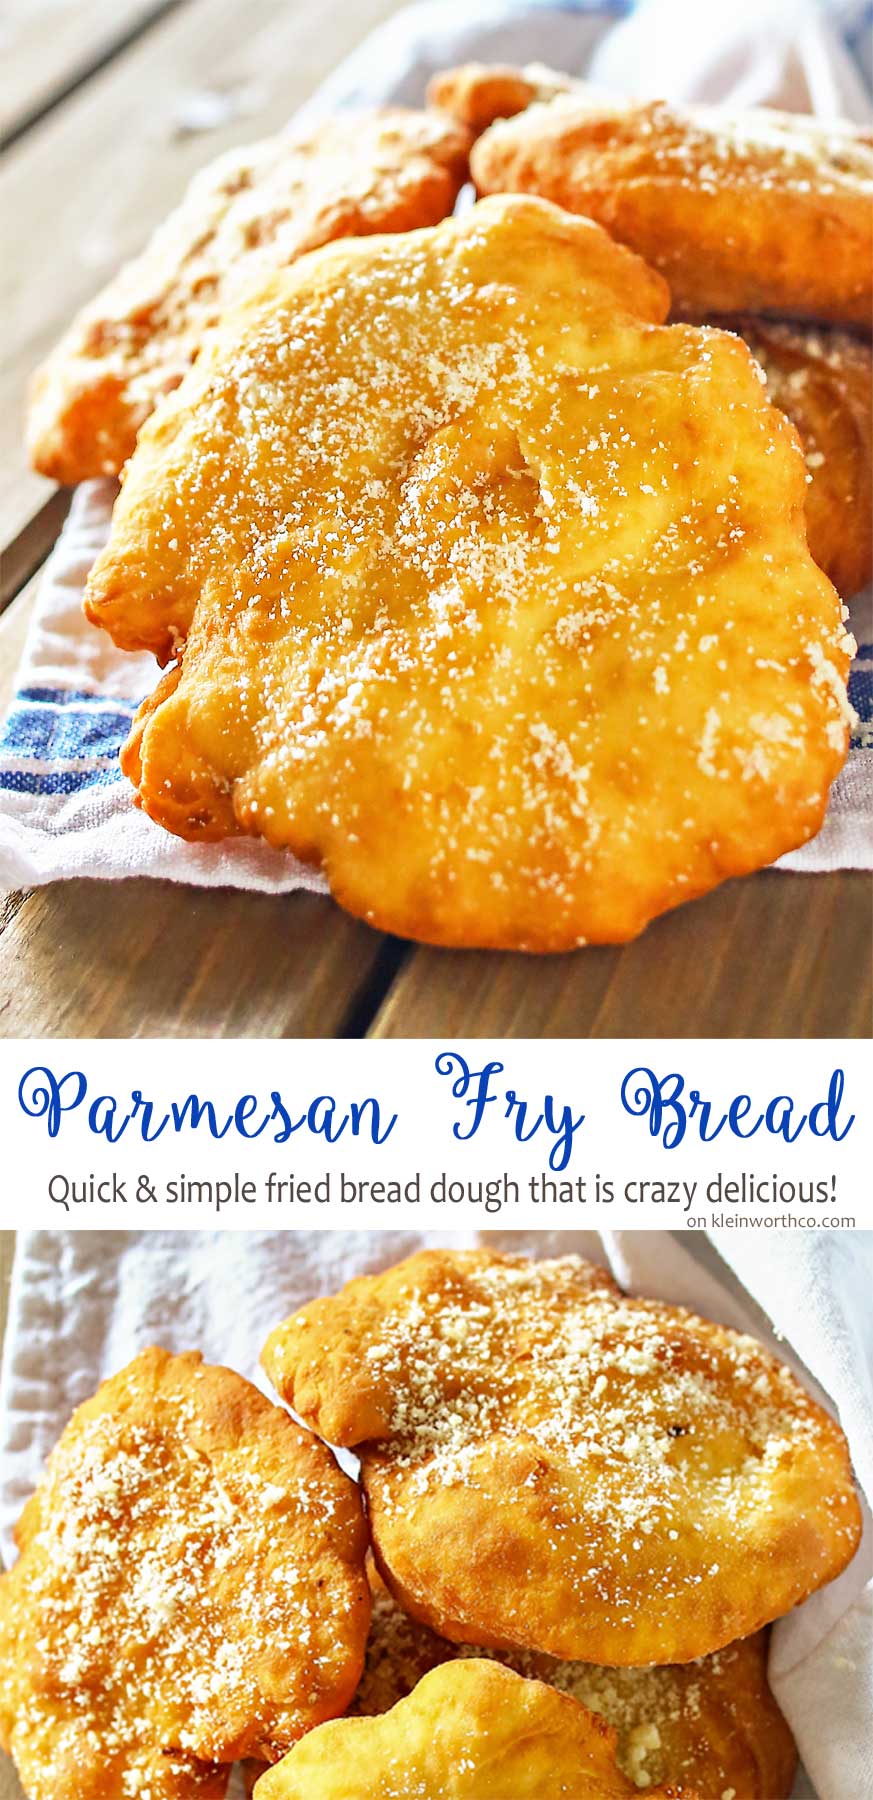 Parmesan Fry Bread is an easy and simple bread dough is quickly fried and sprinkled with Parmesan cheese. Delicious addition to so many dinner recipes!